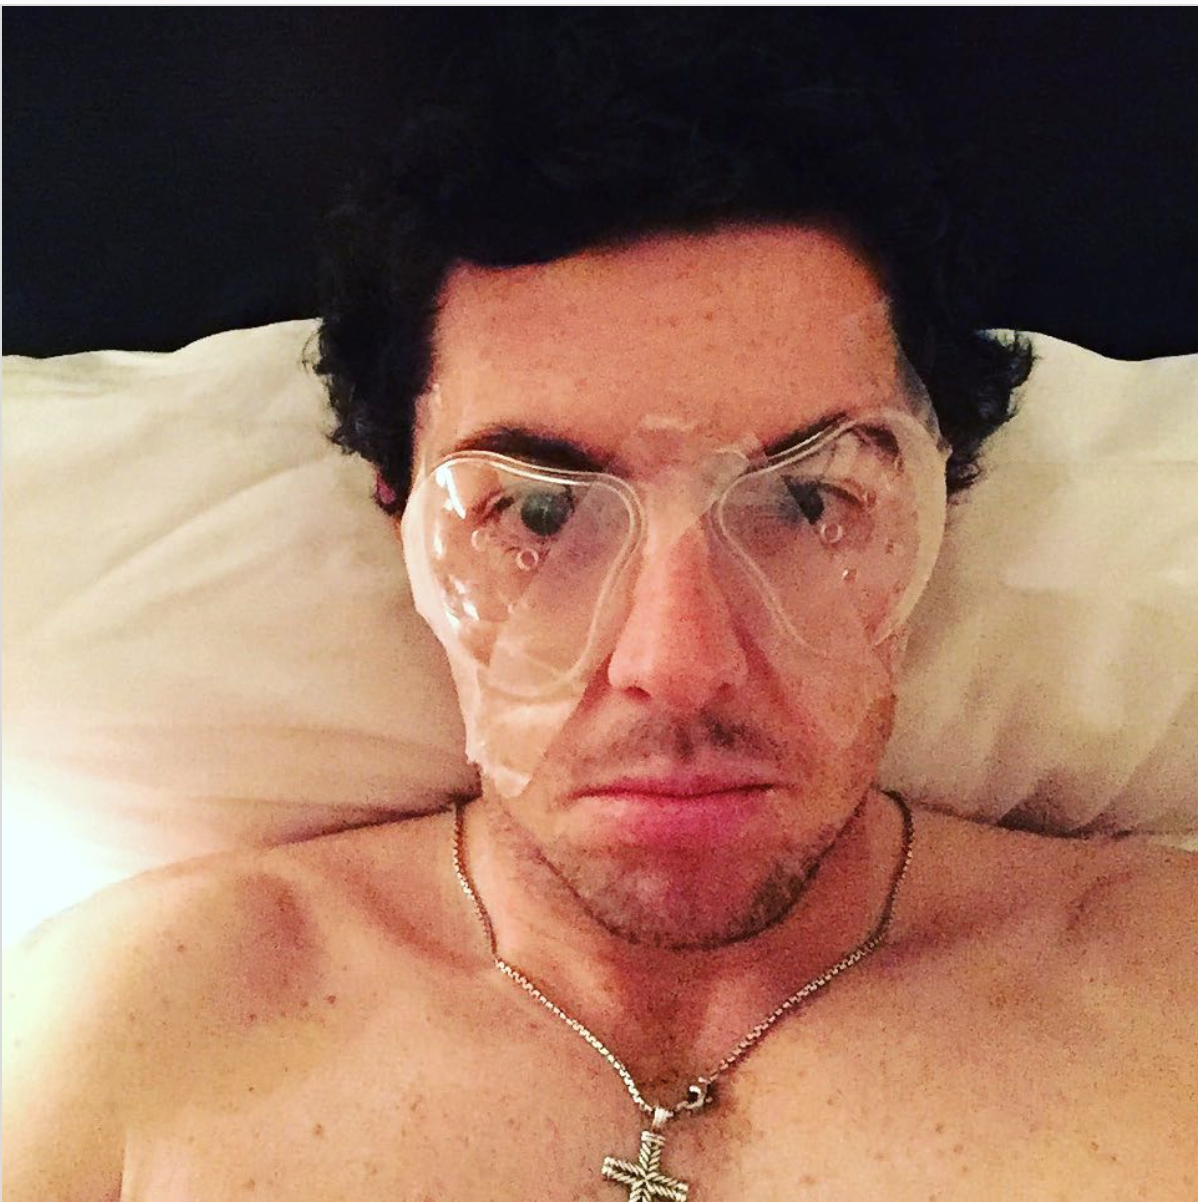 Rory McIlroy has LASIK to see the golf ball clearly from tee to green.